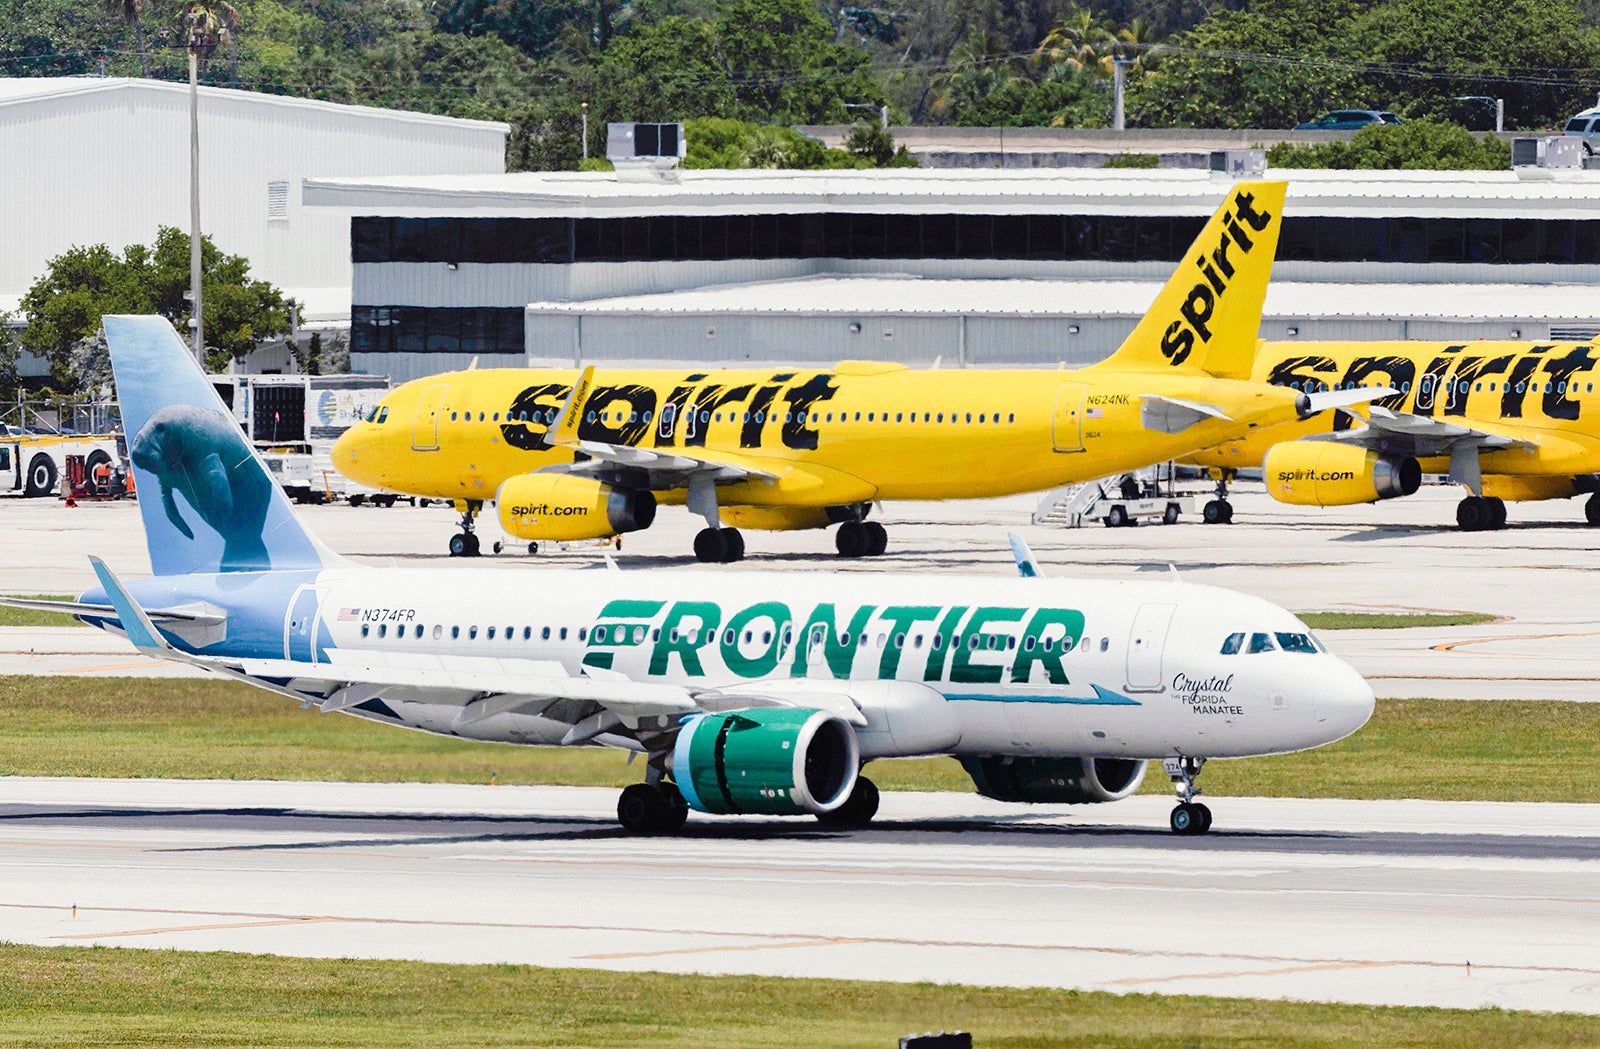 spirit and frontier planes